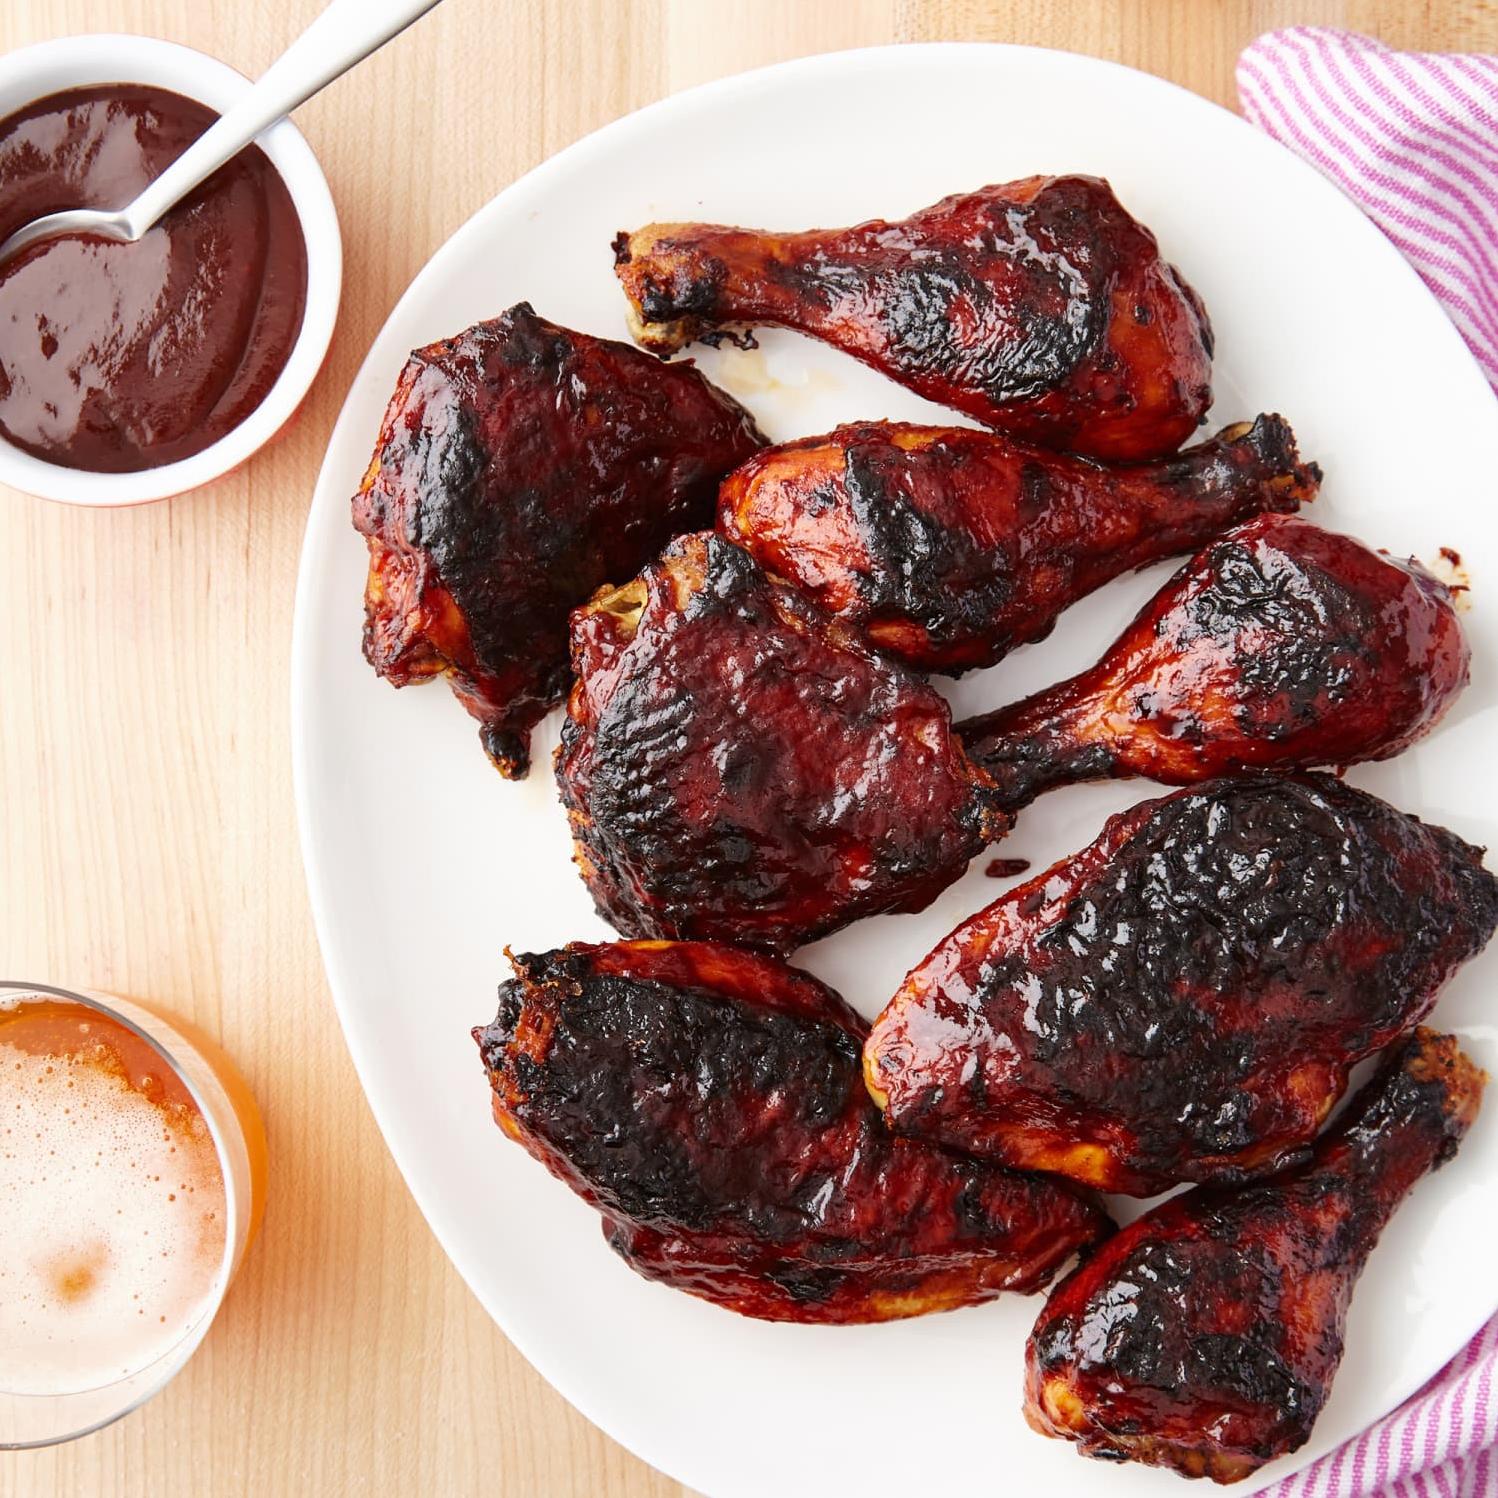  The secret ingredient in our barbecue sauce? You guessed it - coffee!